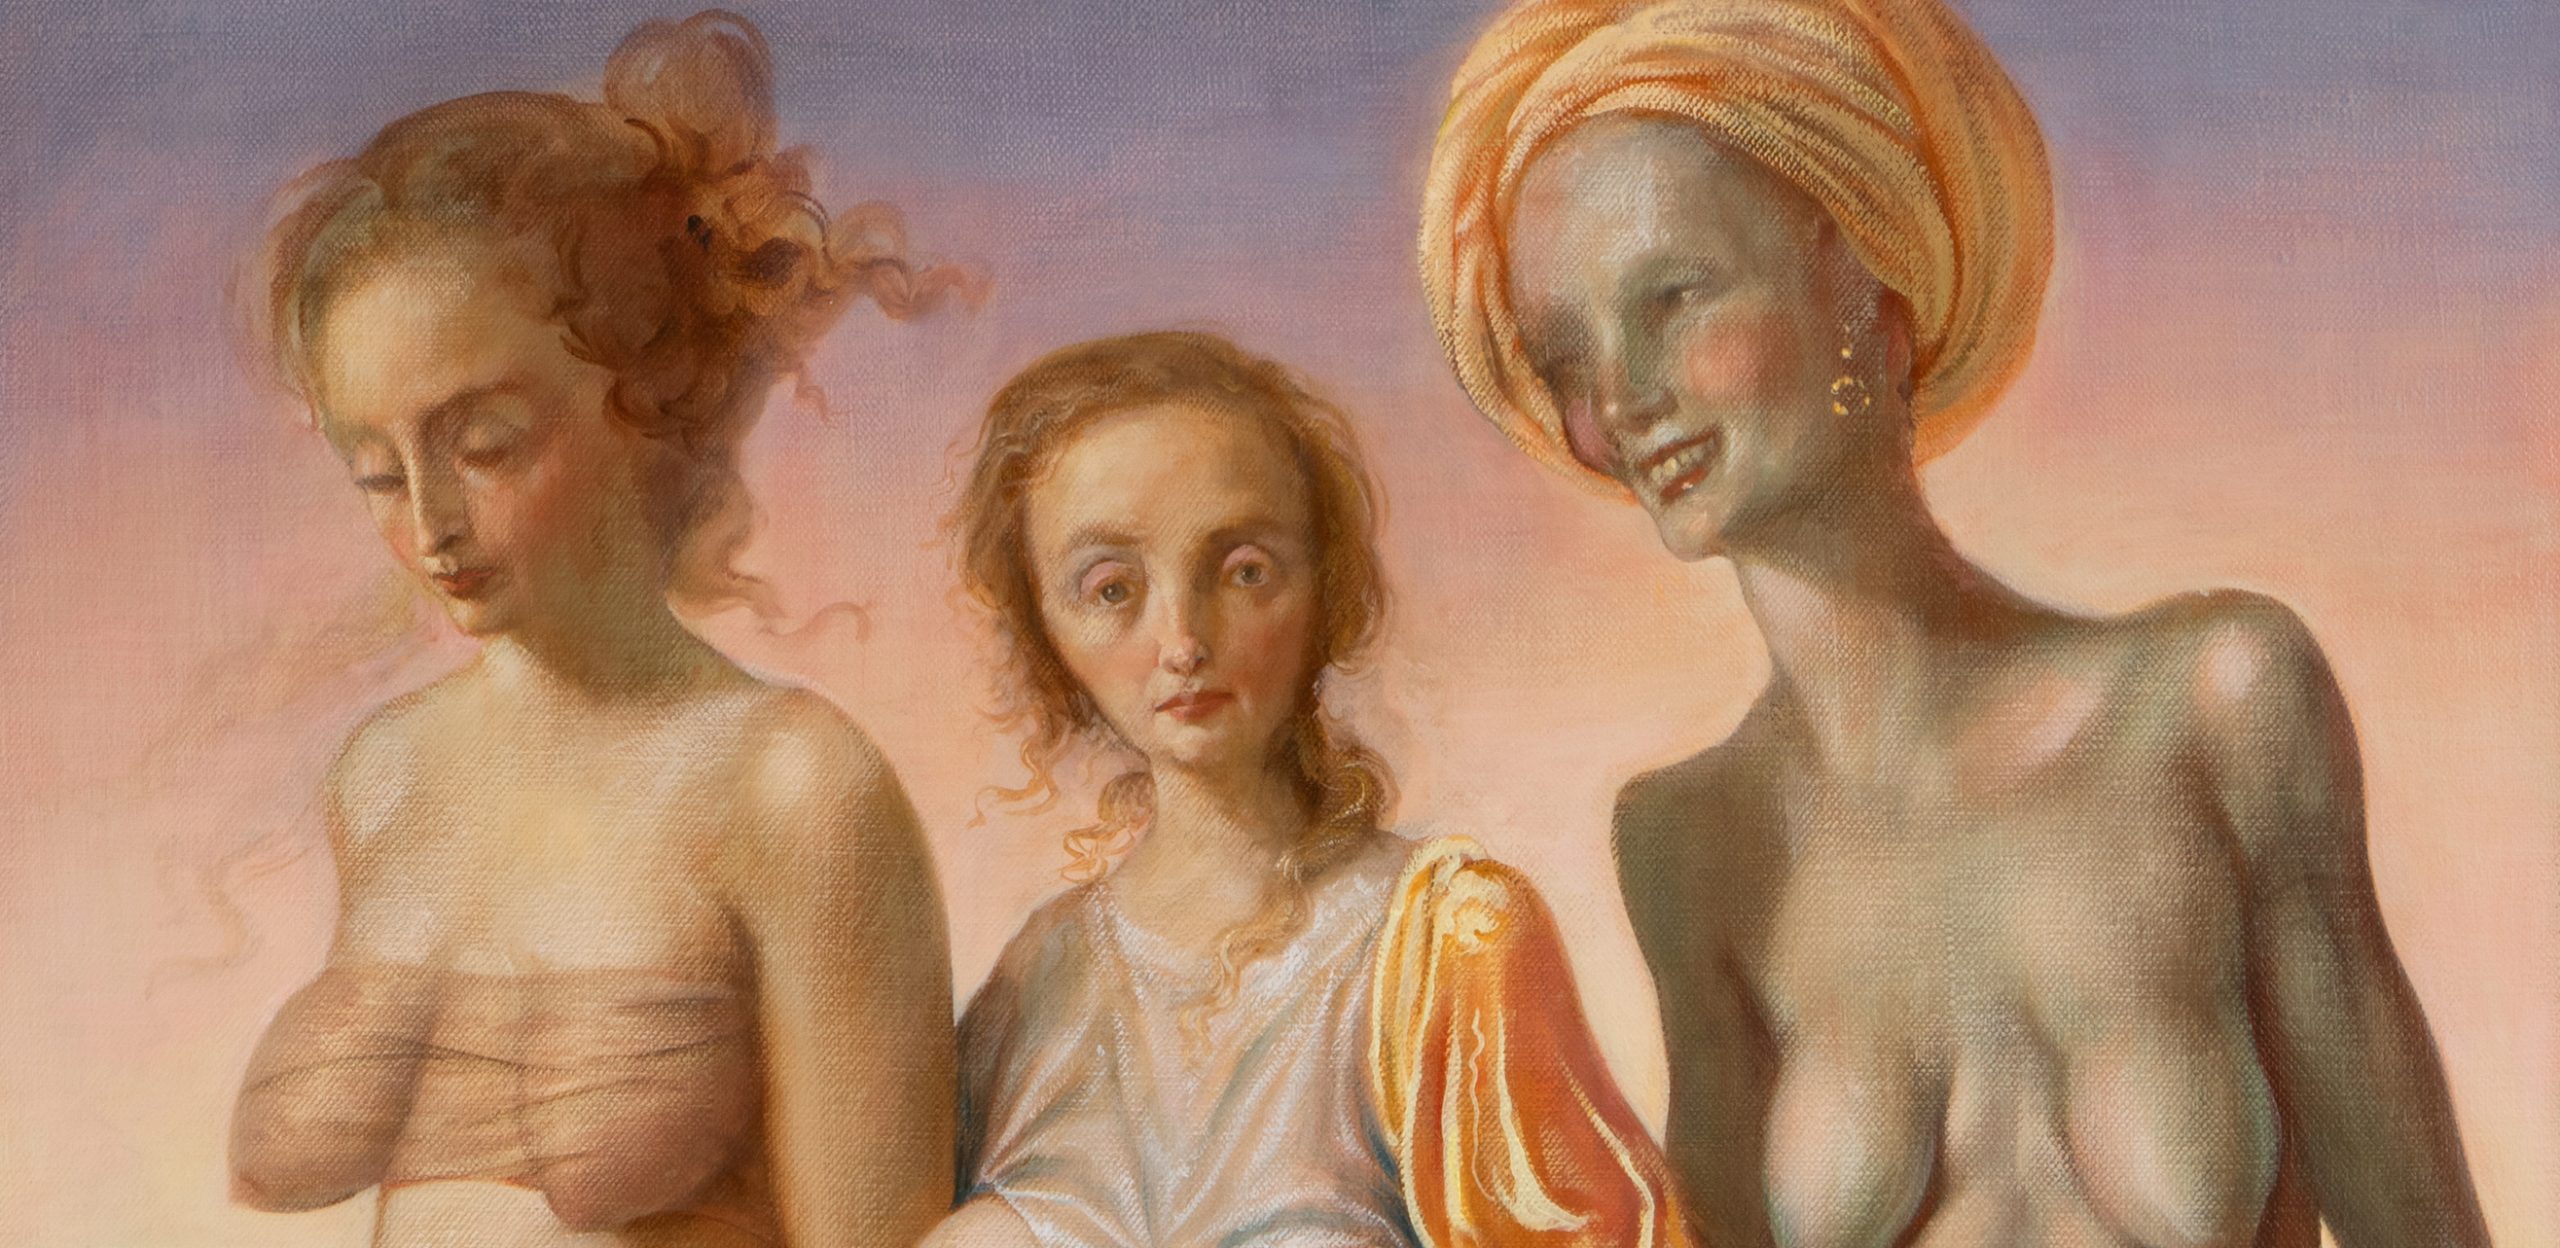 Nepali Girl Hot Sex Vedio - John Currin's Paintings Are Disgusting and Amoral. That's Why They're So  Good - ArtReview